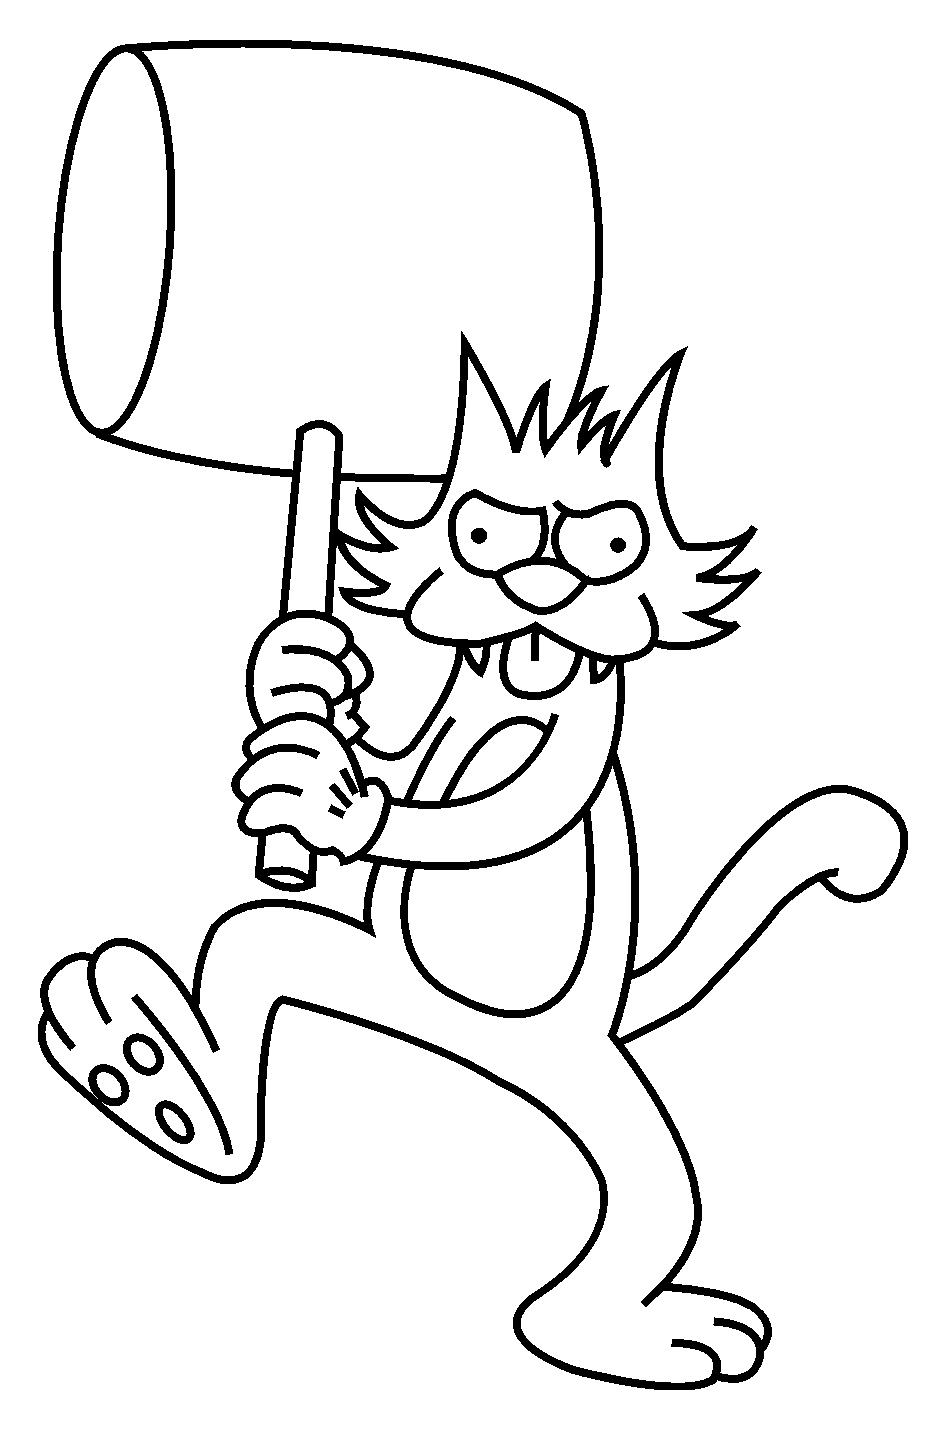 The Simpsons Characters Coloring Page Coloring Sun Coloring Pages ...